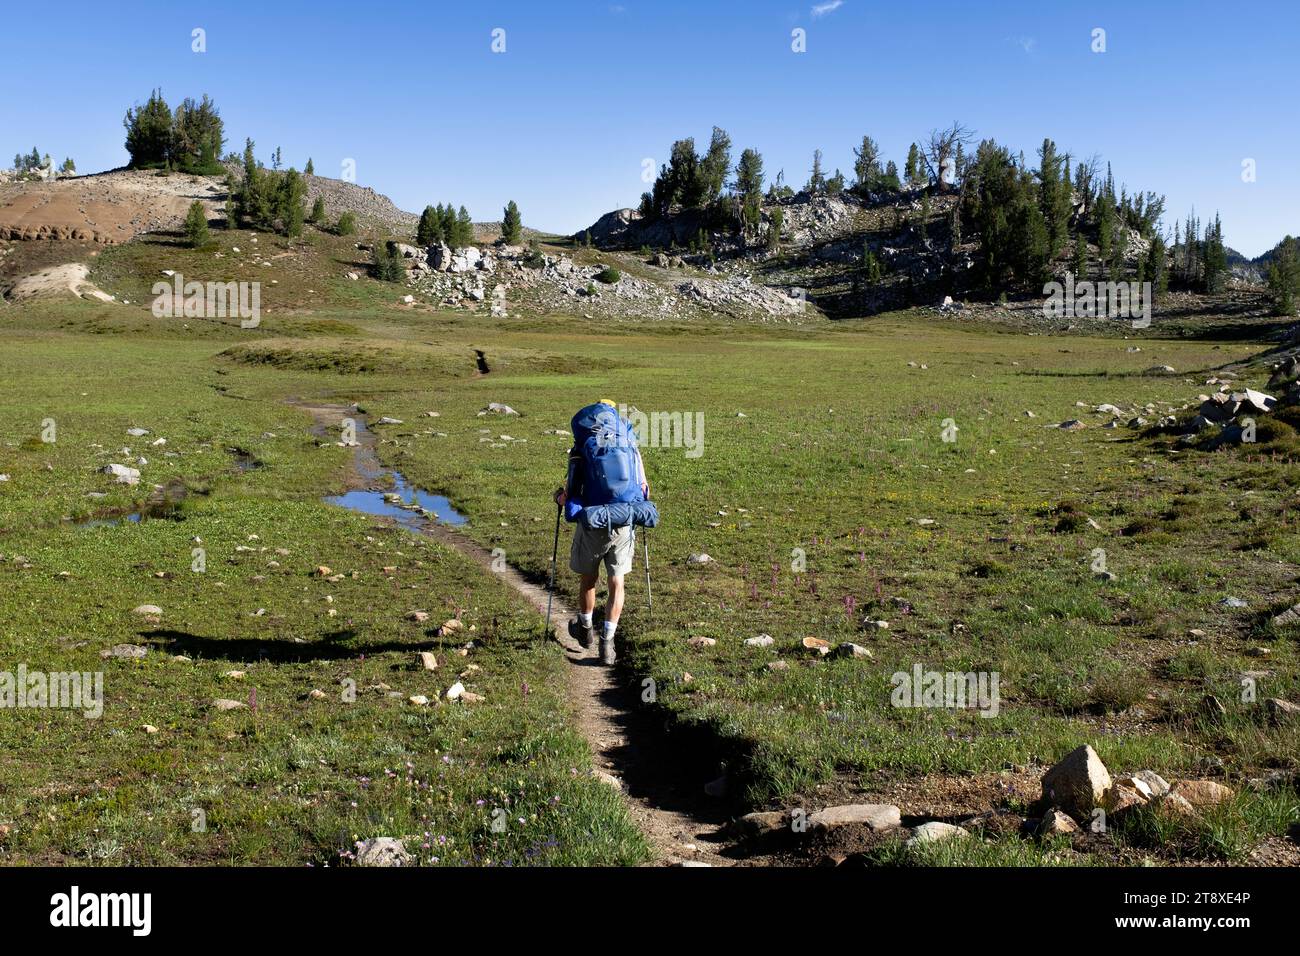 OR02670-00....OREGON - Man backpacking on the Copper Creek Trail #1656 inthe Eagle Cap Wilderness, Wallowa-Whitman National Forest. MR# K1 Stock Photo